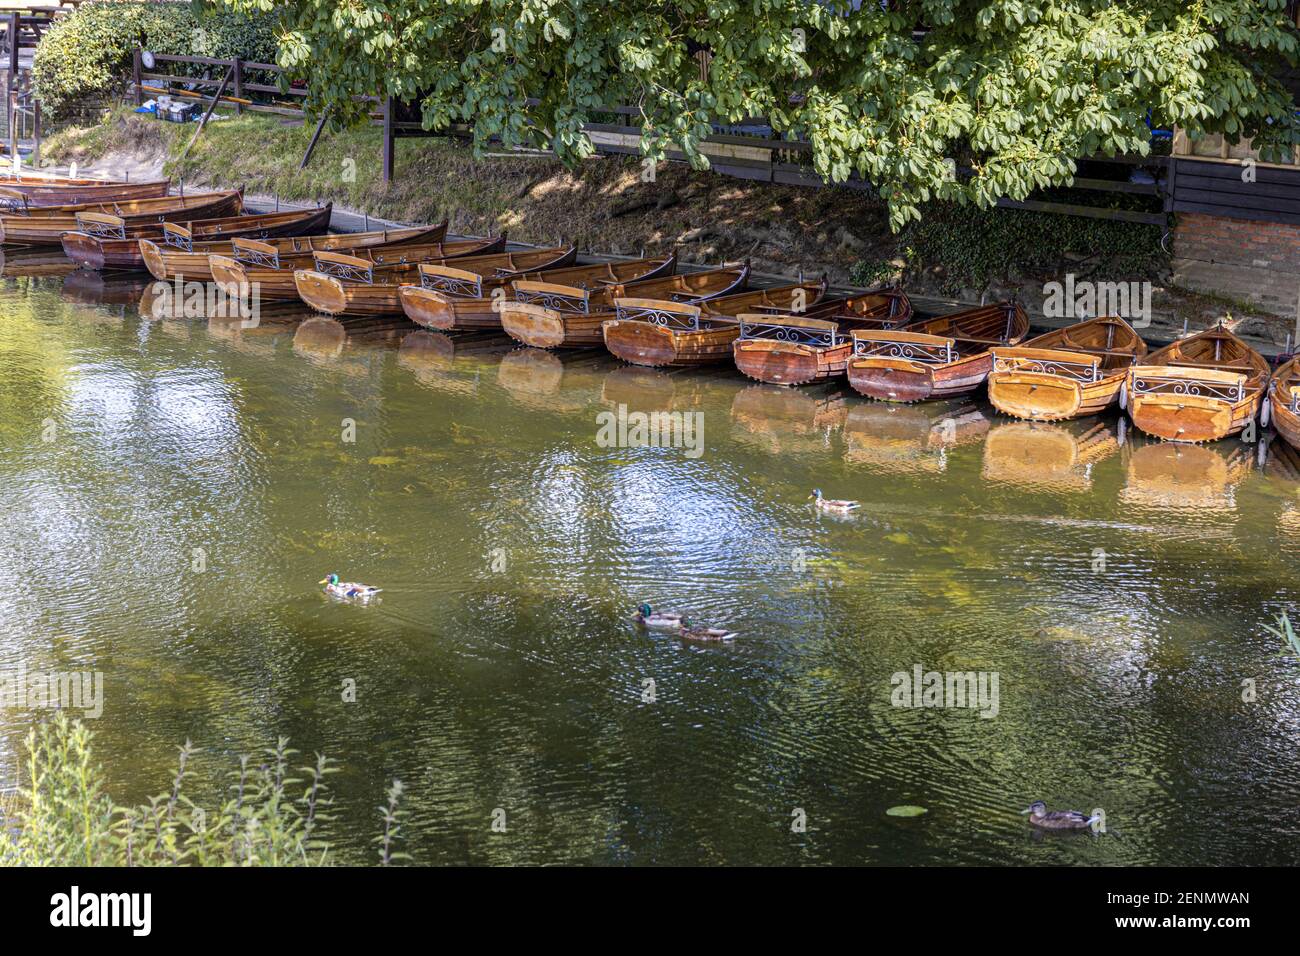 Summertime in Constable Country - Rowing boats for hire on the River Stour at Dedham, Essex UK Stock Photo